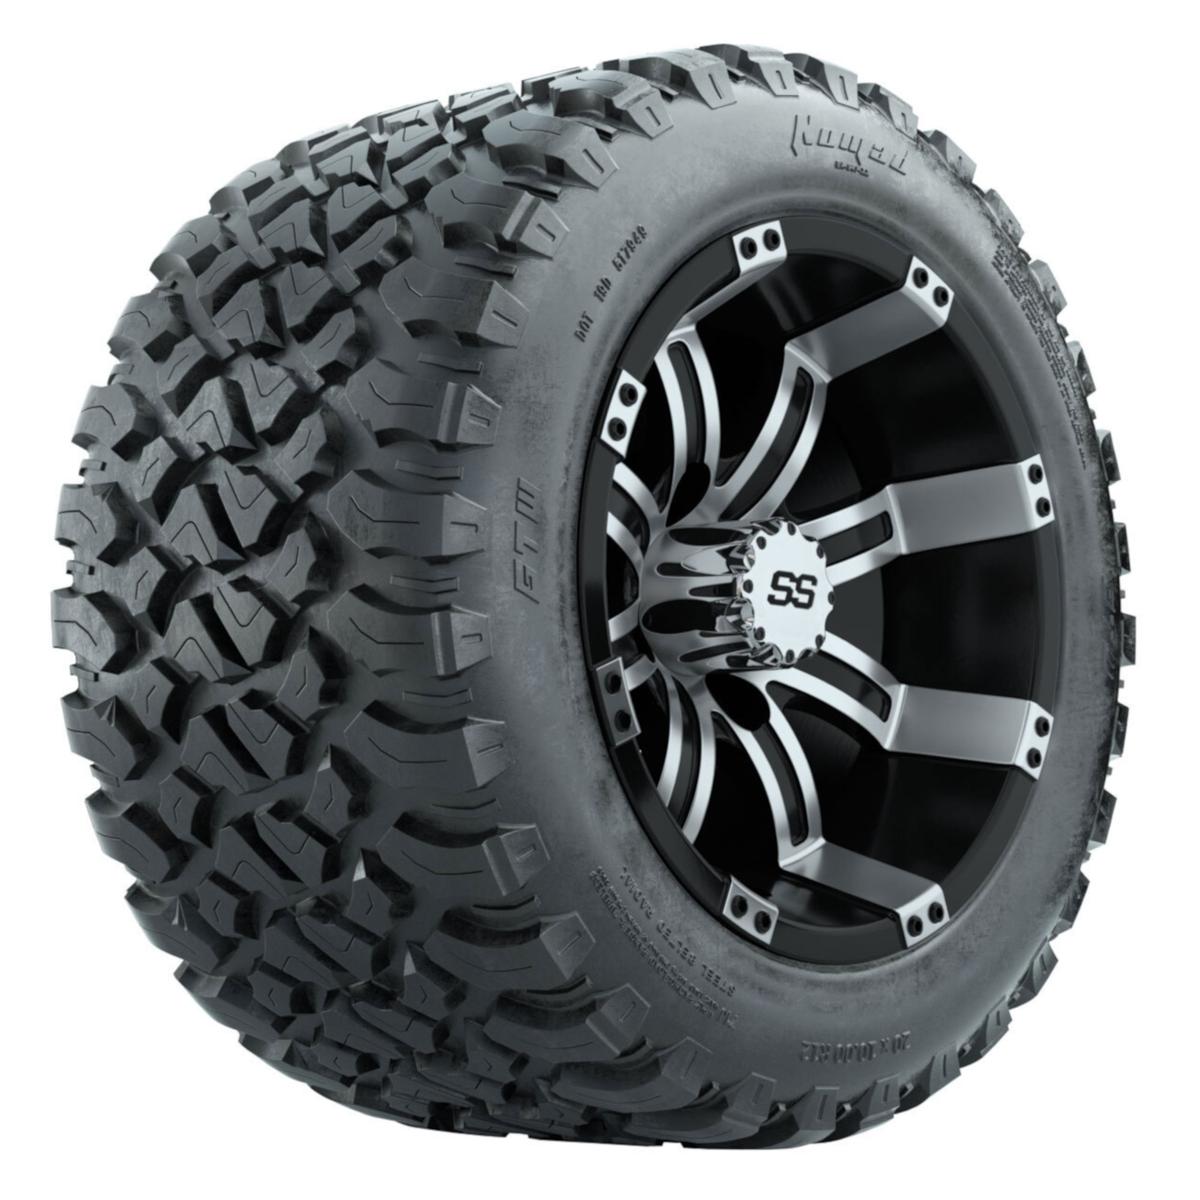 Set of (4) 12 in GTW Tempest Wheels with 20x10-R12 GTW Nomad All-Terrain Tires